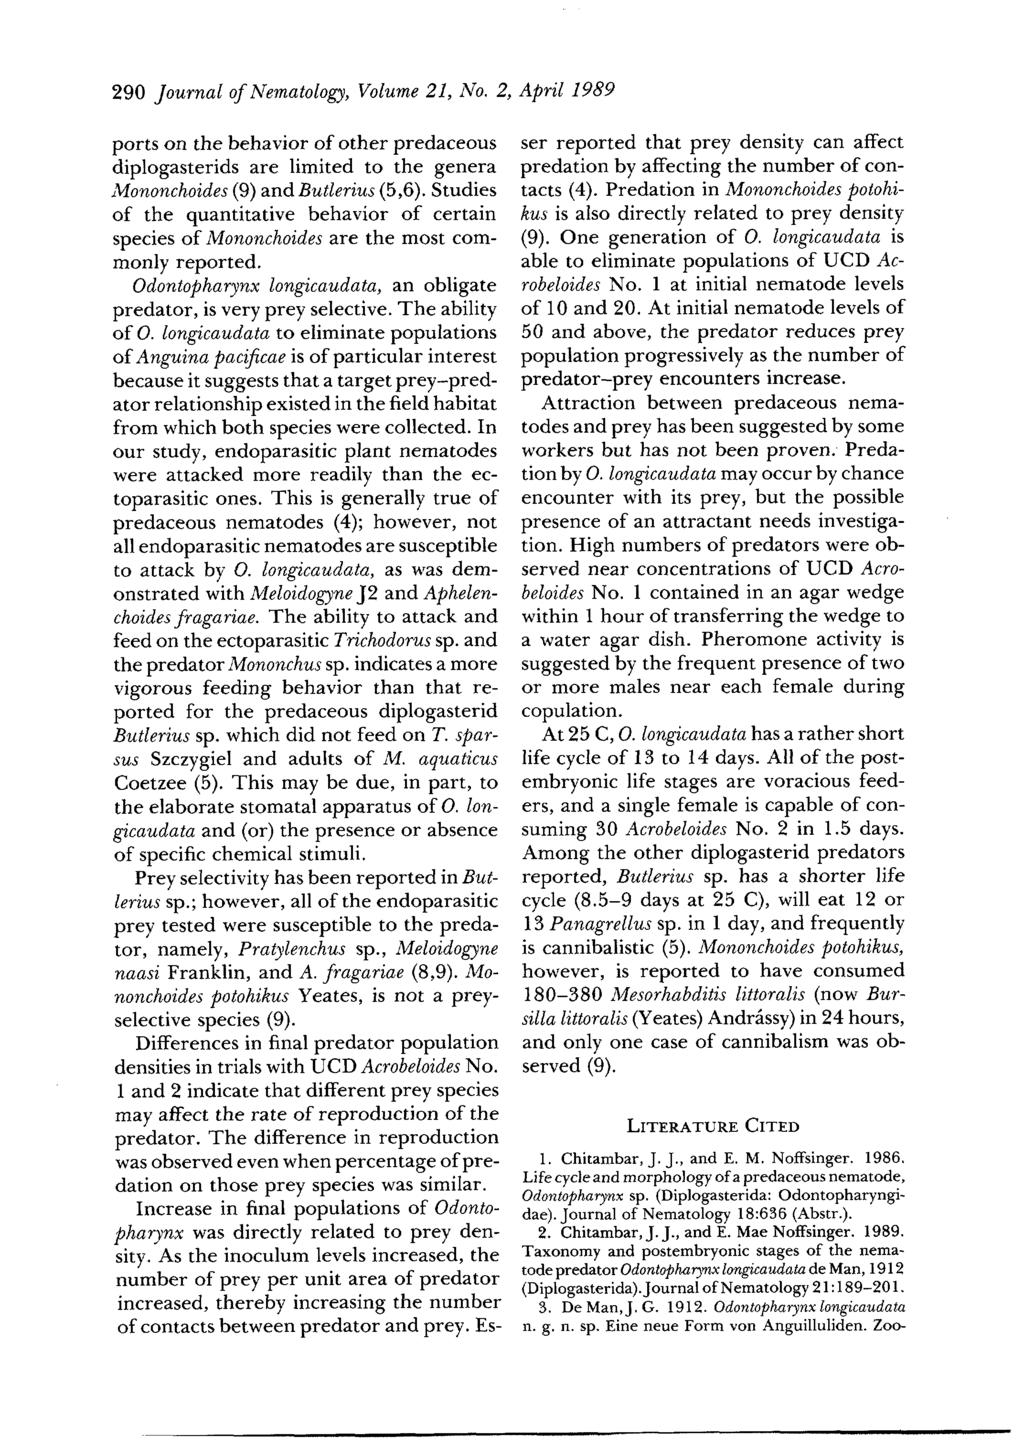 290 Journal of Nematology, Volume 21, No. 2, April 1989 ports on the behavior of other predaceous diplogasterids are limited to the genera Mononchoides (9) and Butlerius (5,6).